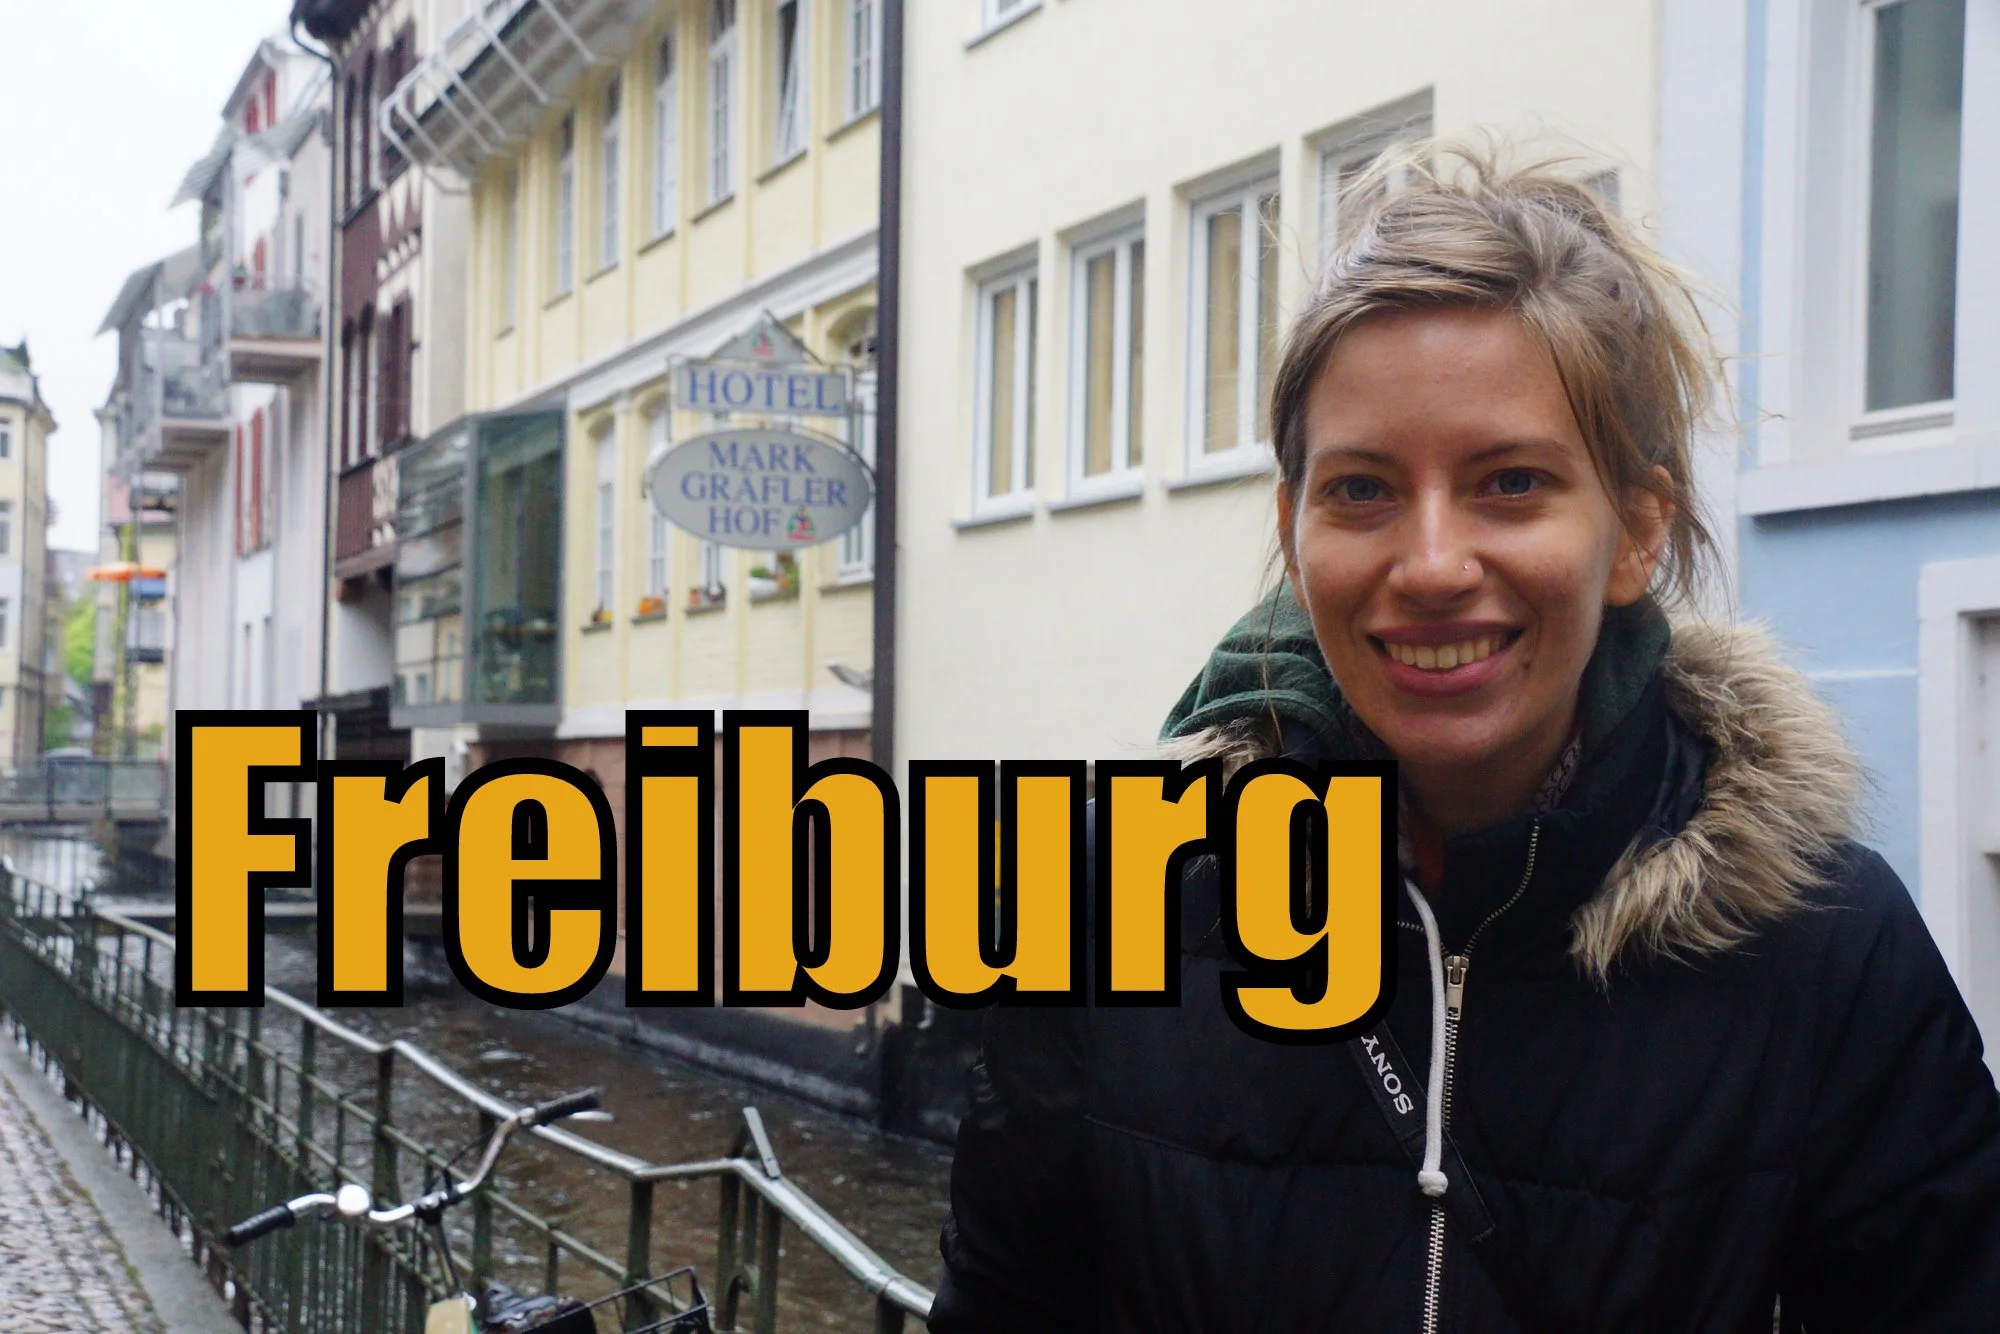 Our day exploring Freiburg while traveling across Germany